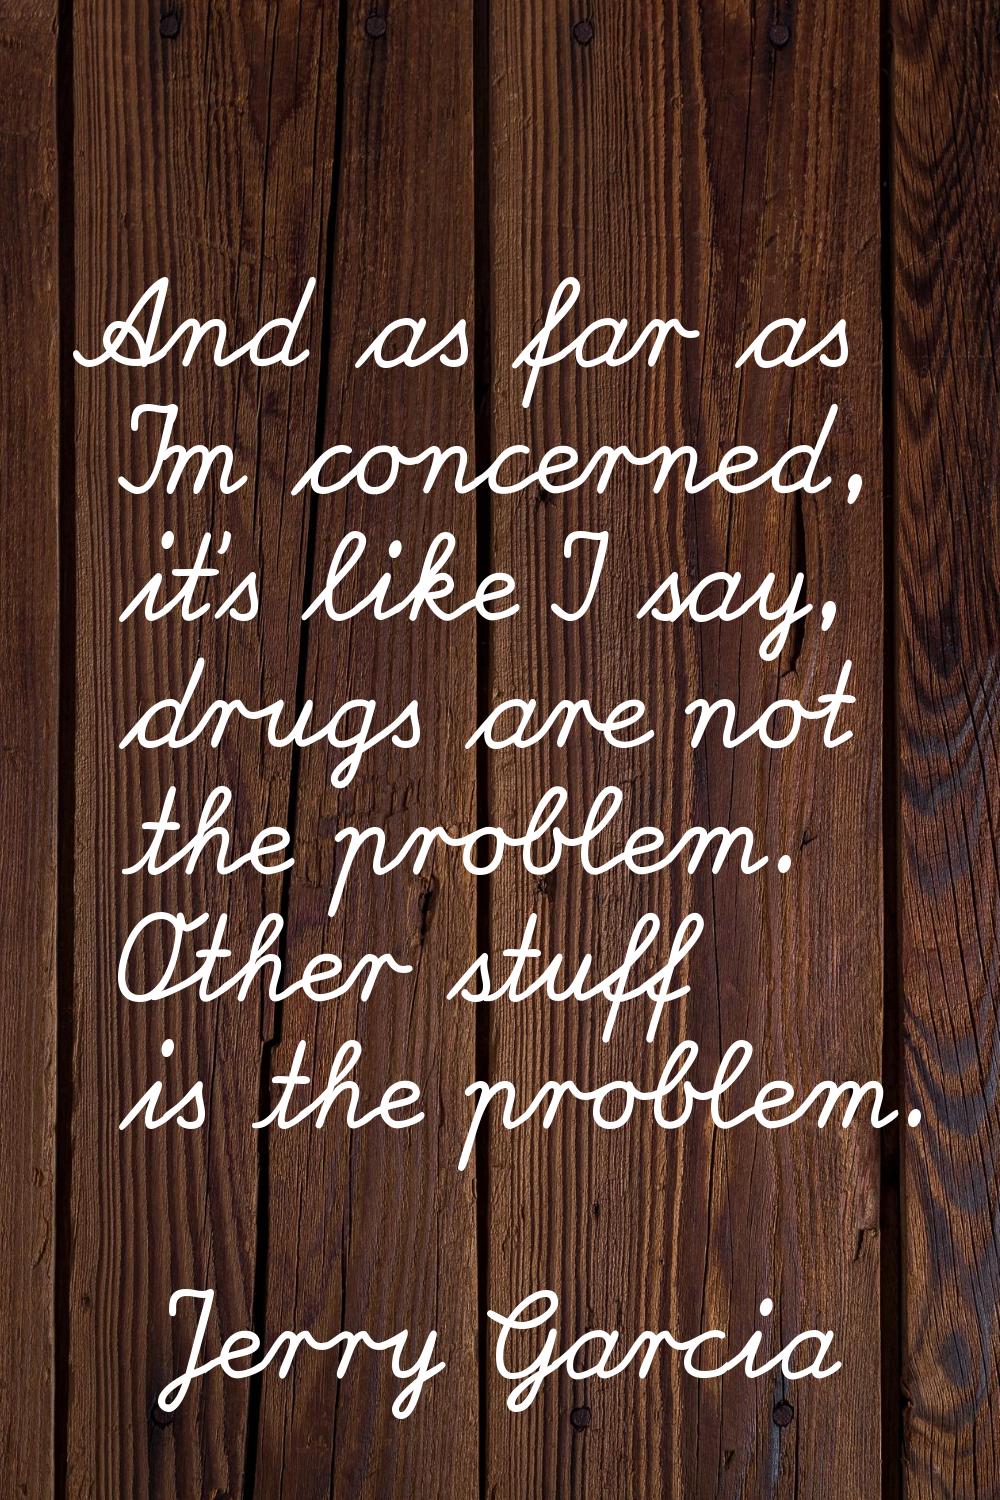 And as far as I'm concerned, it's like I say, drugs are not the problem. Other stuff is the problem